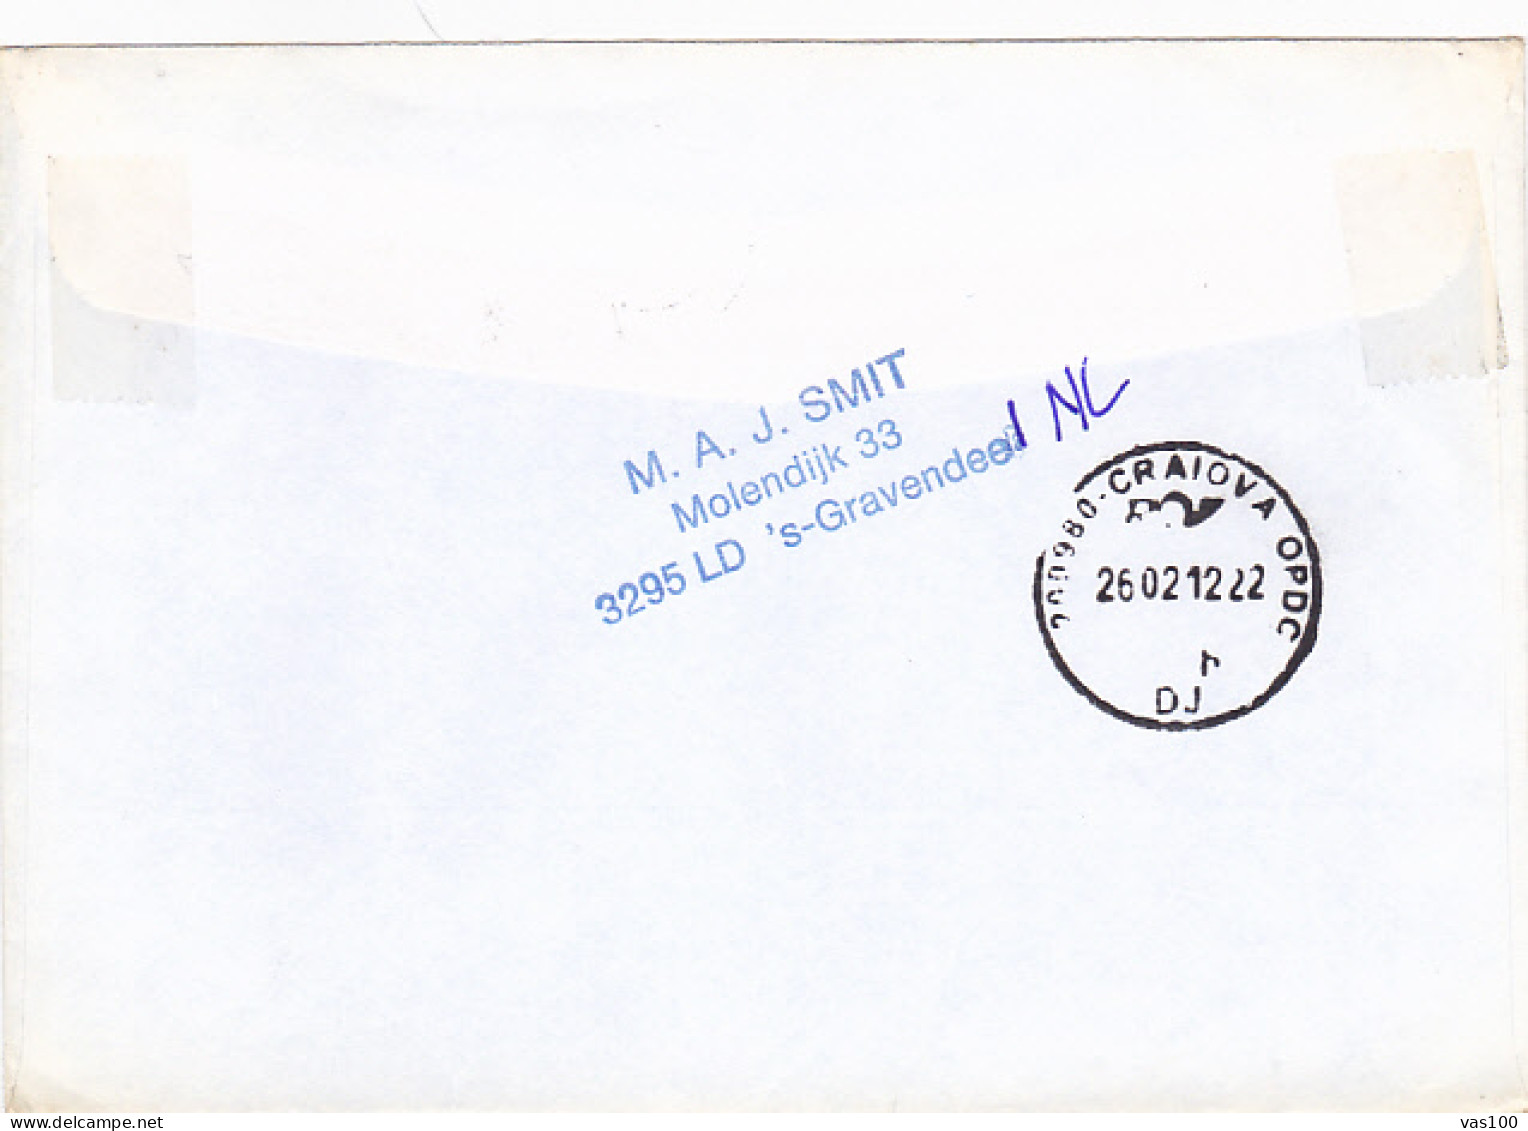 INTERNATIONAL TELECOMMUNICATIONS UNION, WW2- LIBERATION, DELTA WORKS, STAMPS ON COVER, 2012, NETHERLANDS - Lettres & Documents